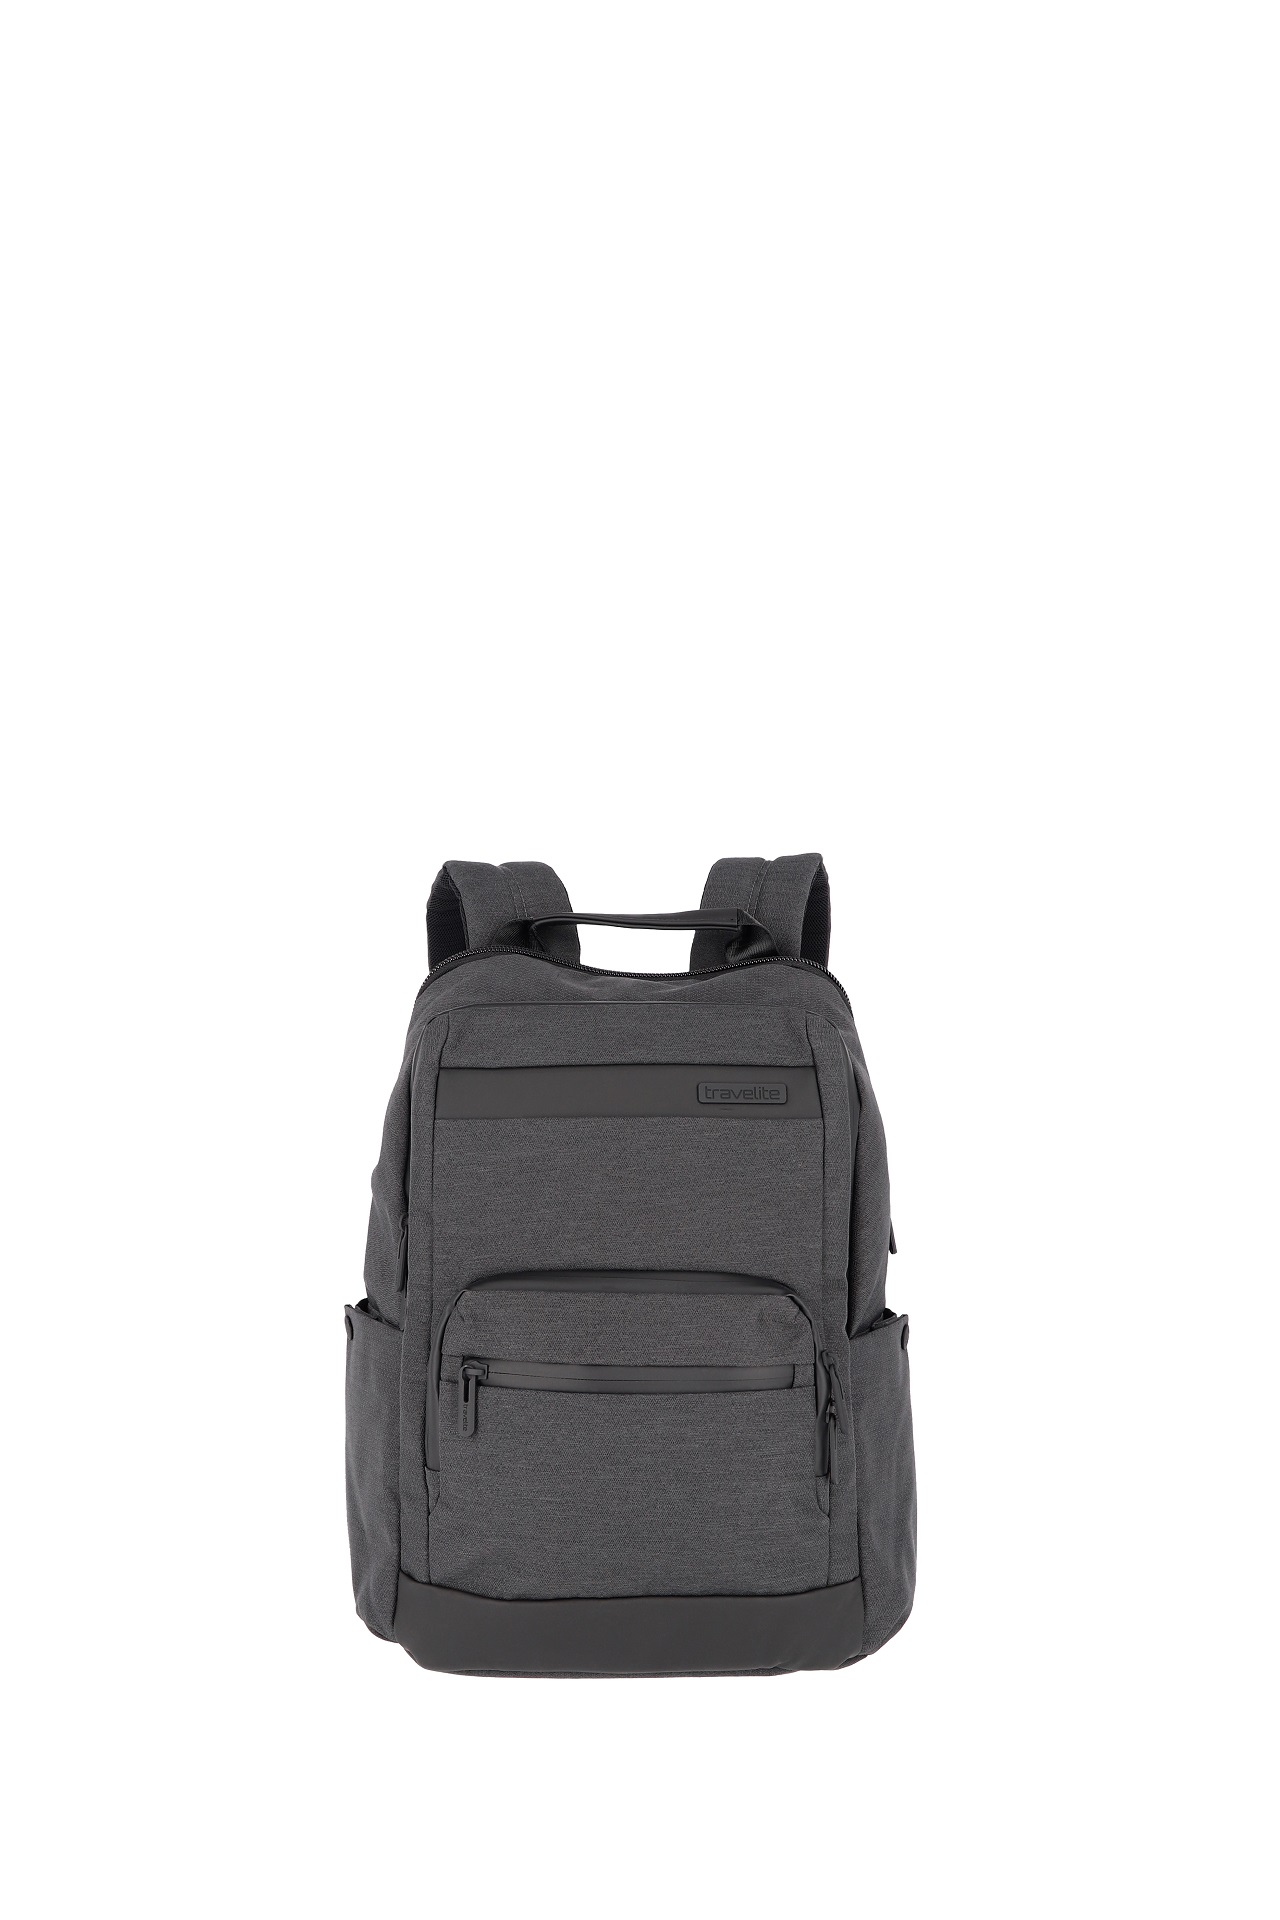 E-shop Travelite Meet Backpack exp Anthracite